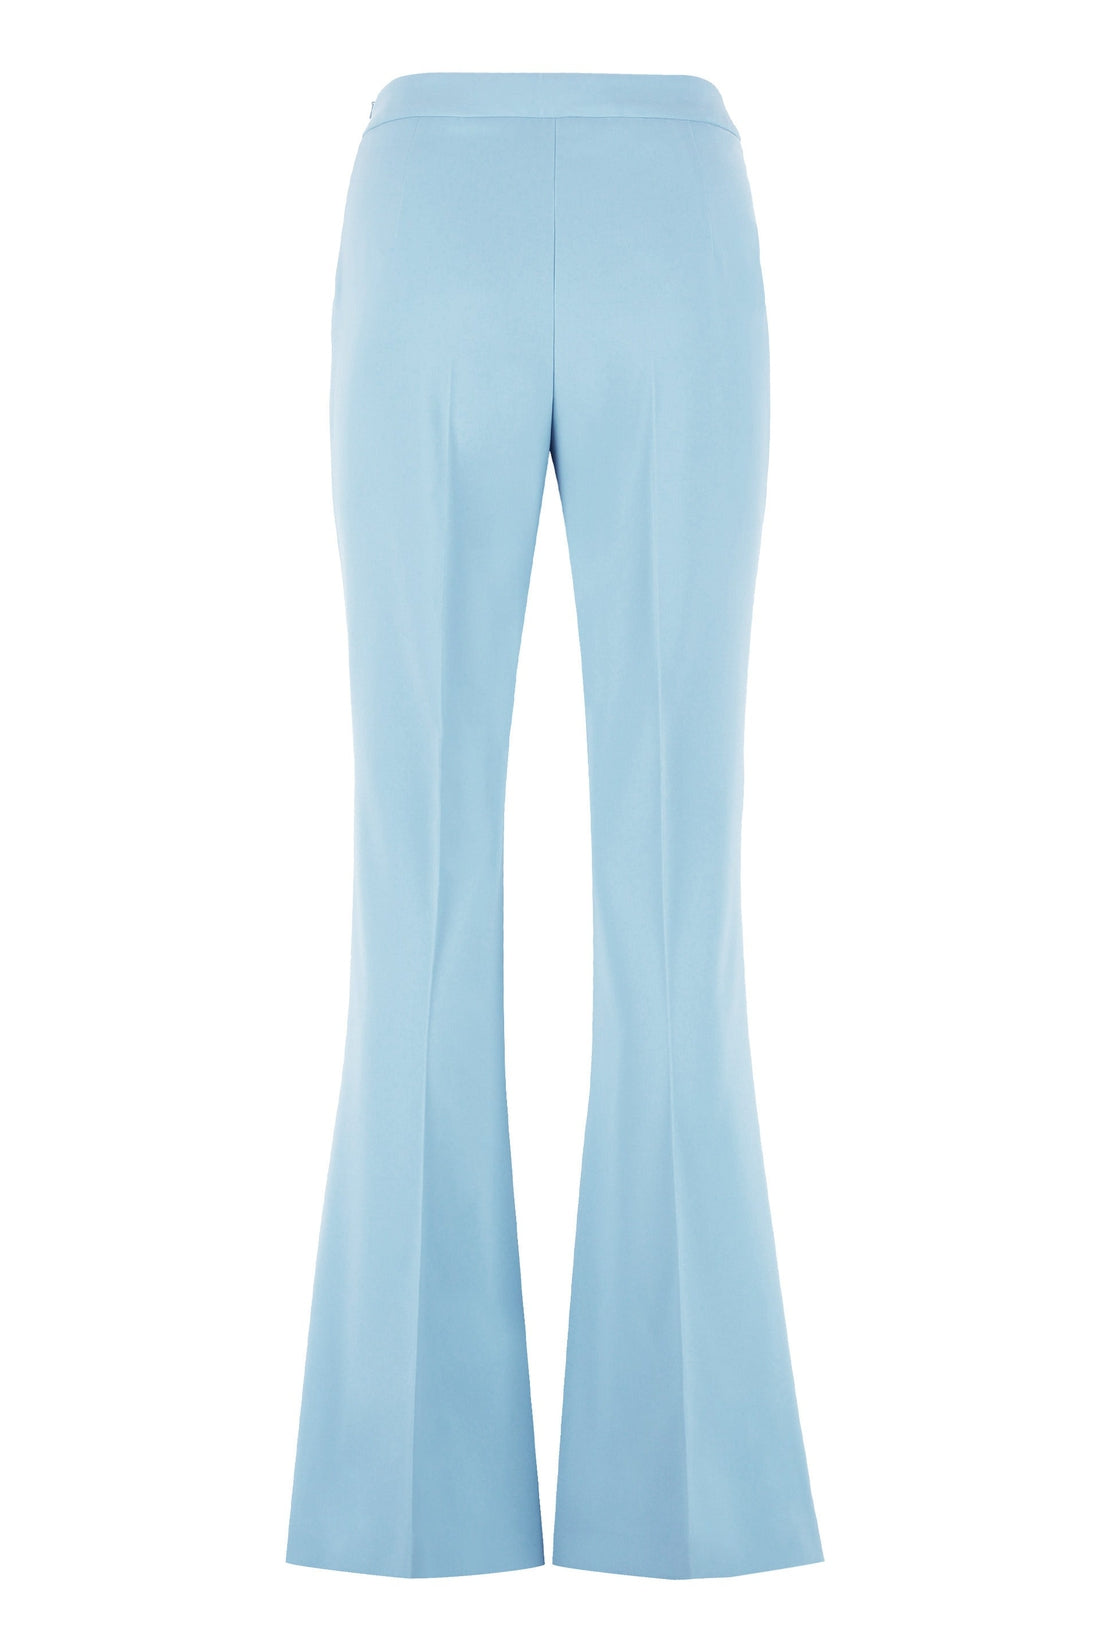 Boutique Moschino-OUTLET-SALE-Flared trousers-ARCHIVIST